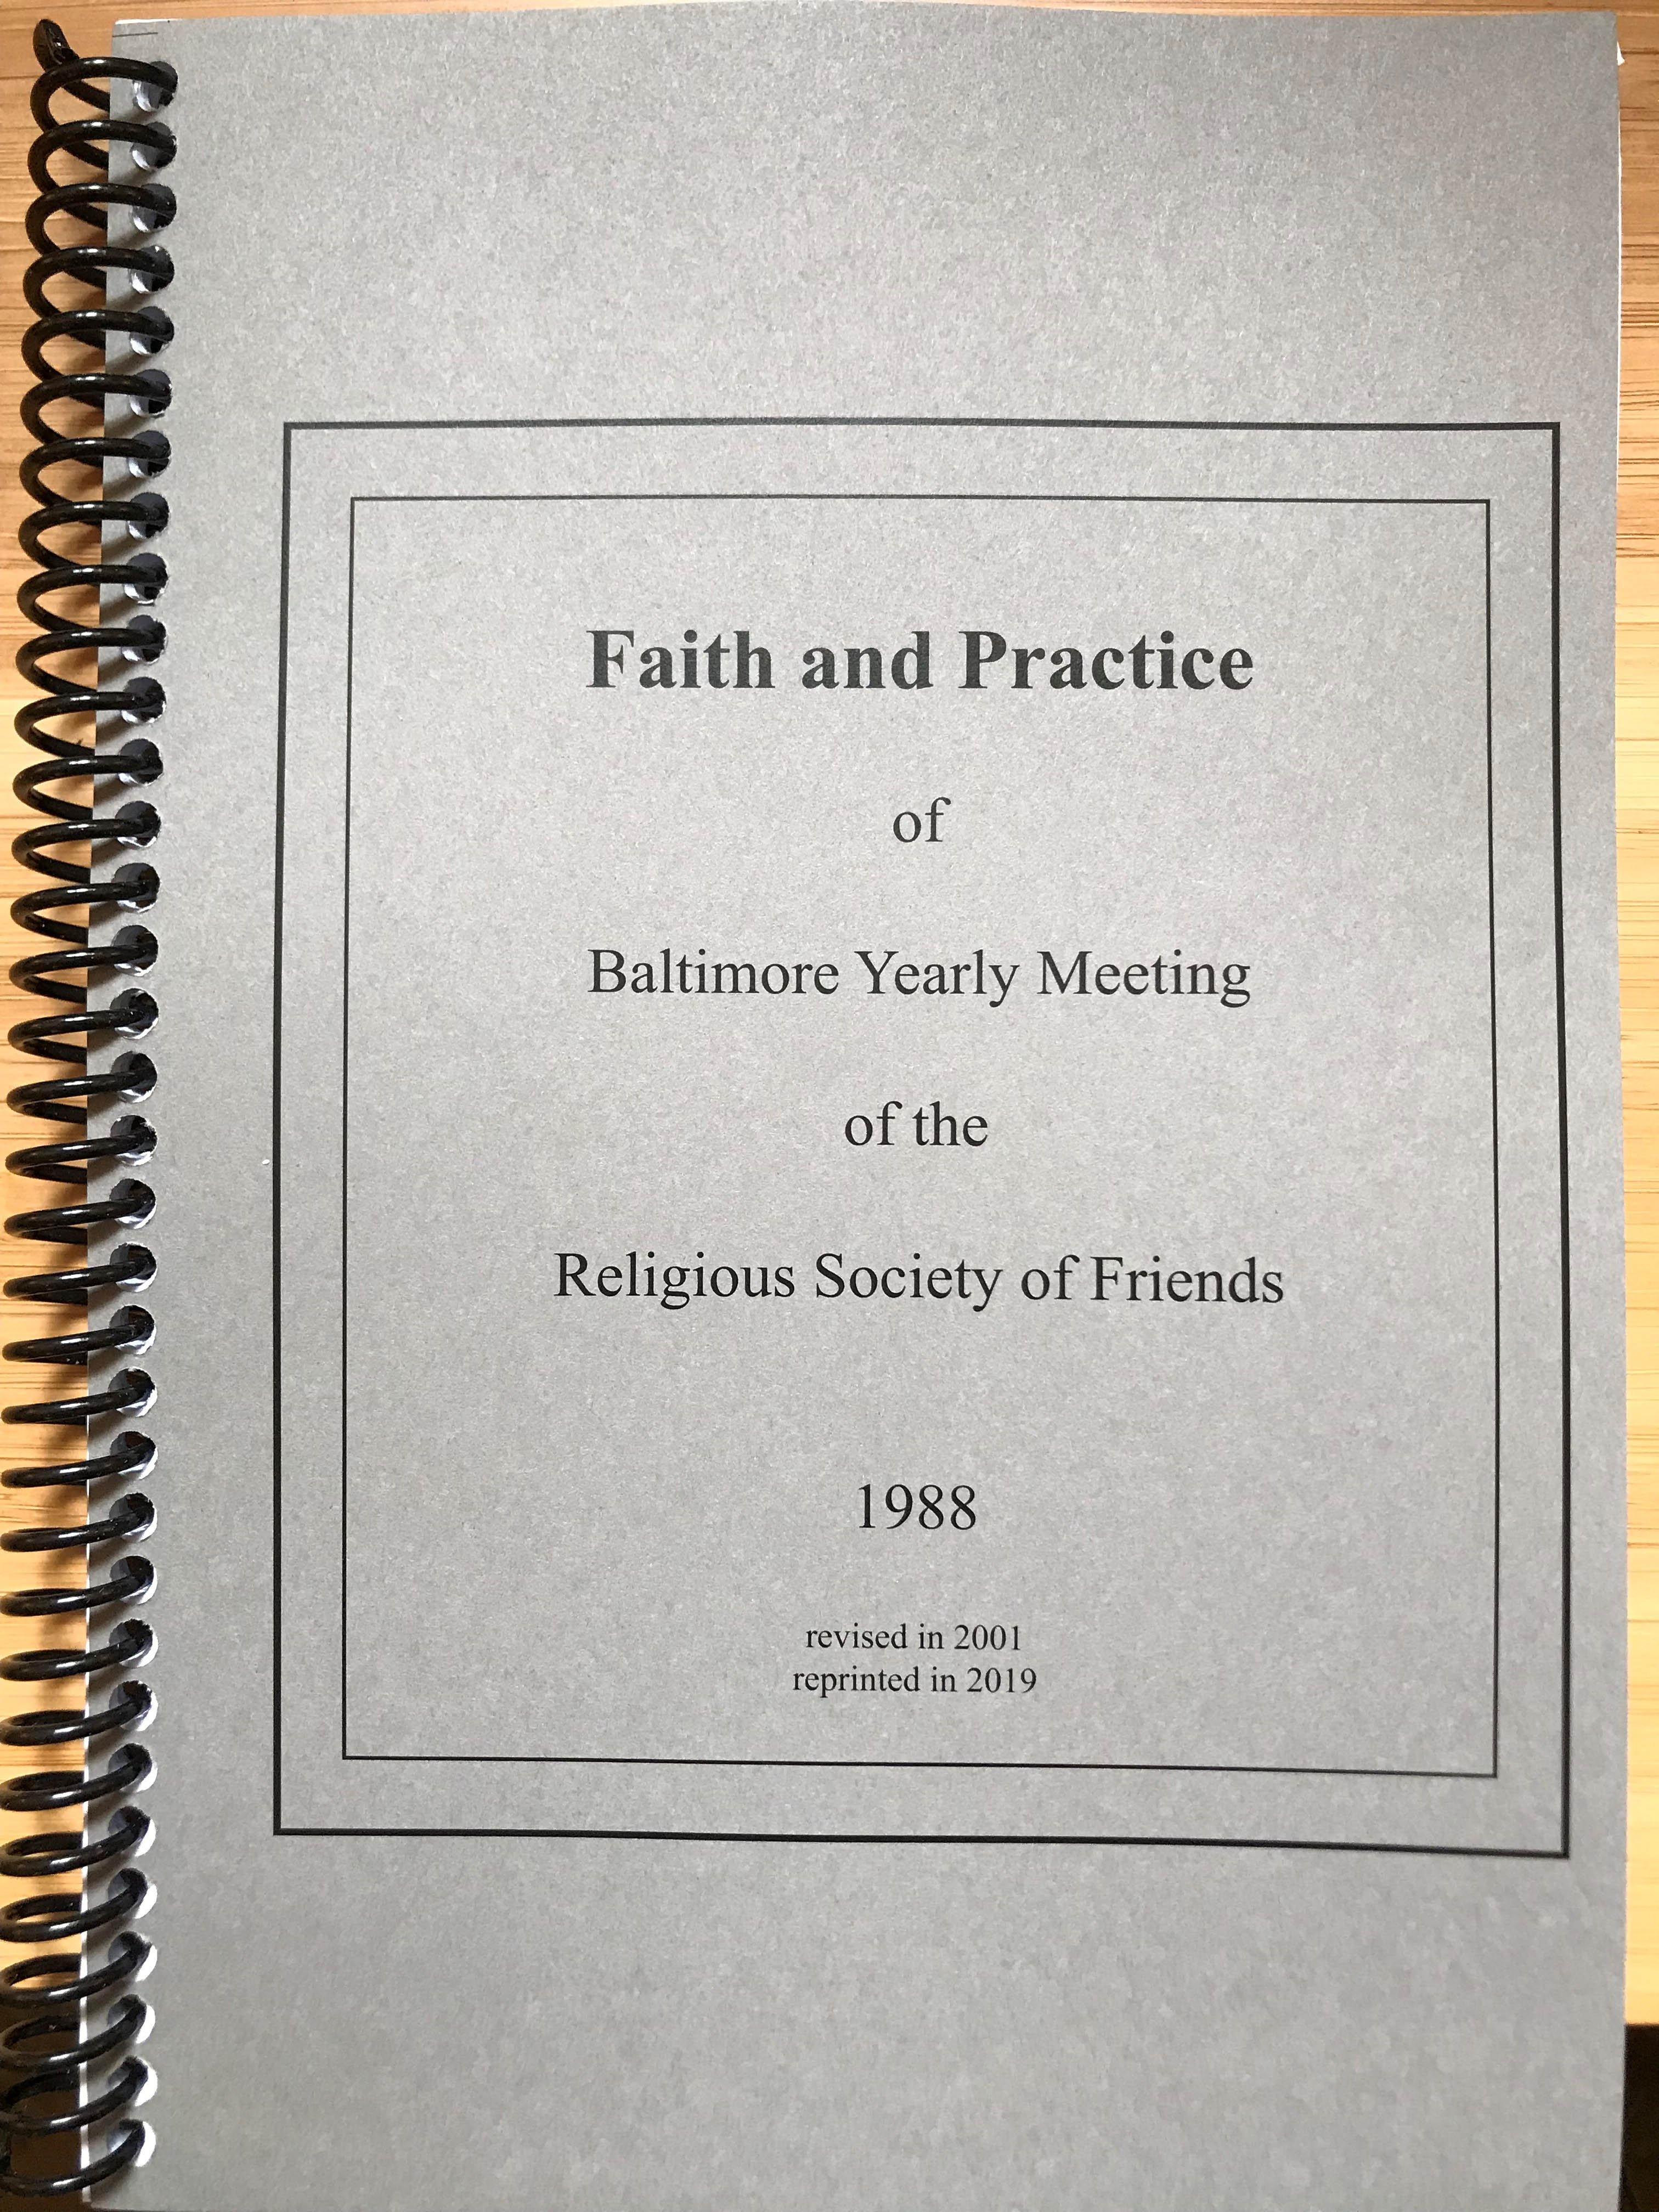 Faith and Practice, 1988 text as amended in 2001